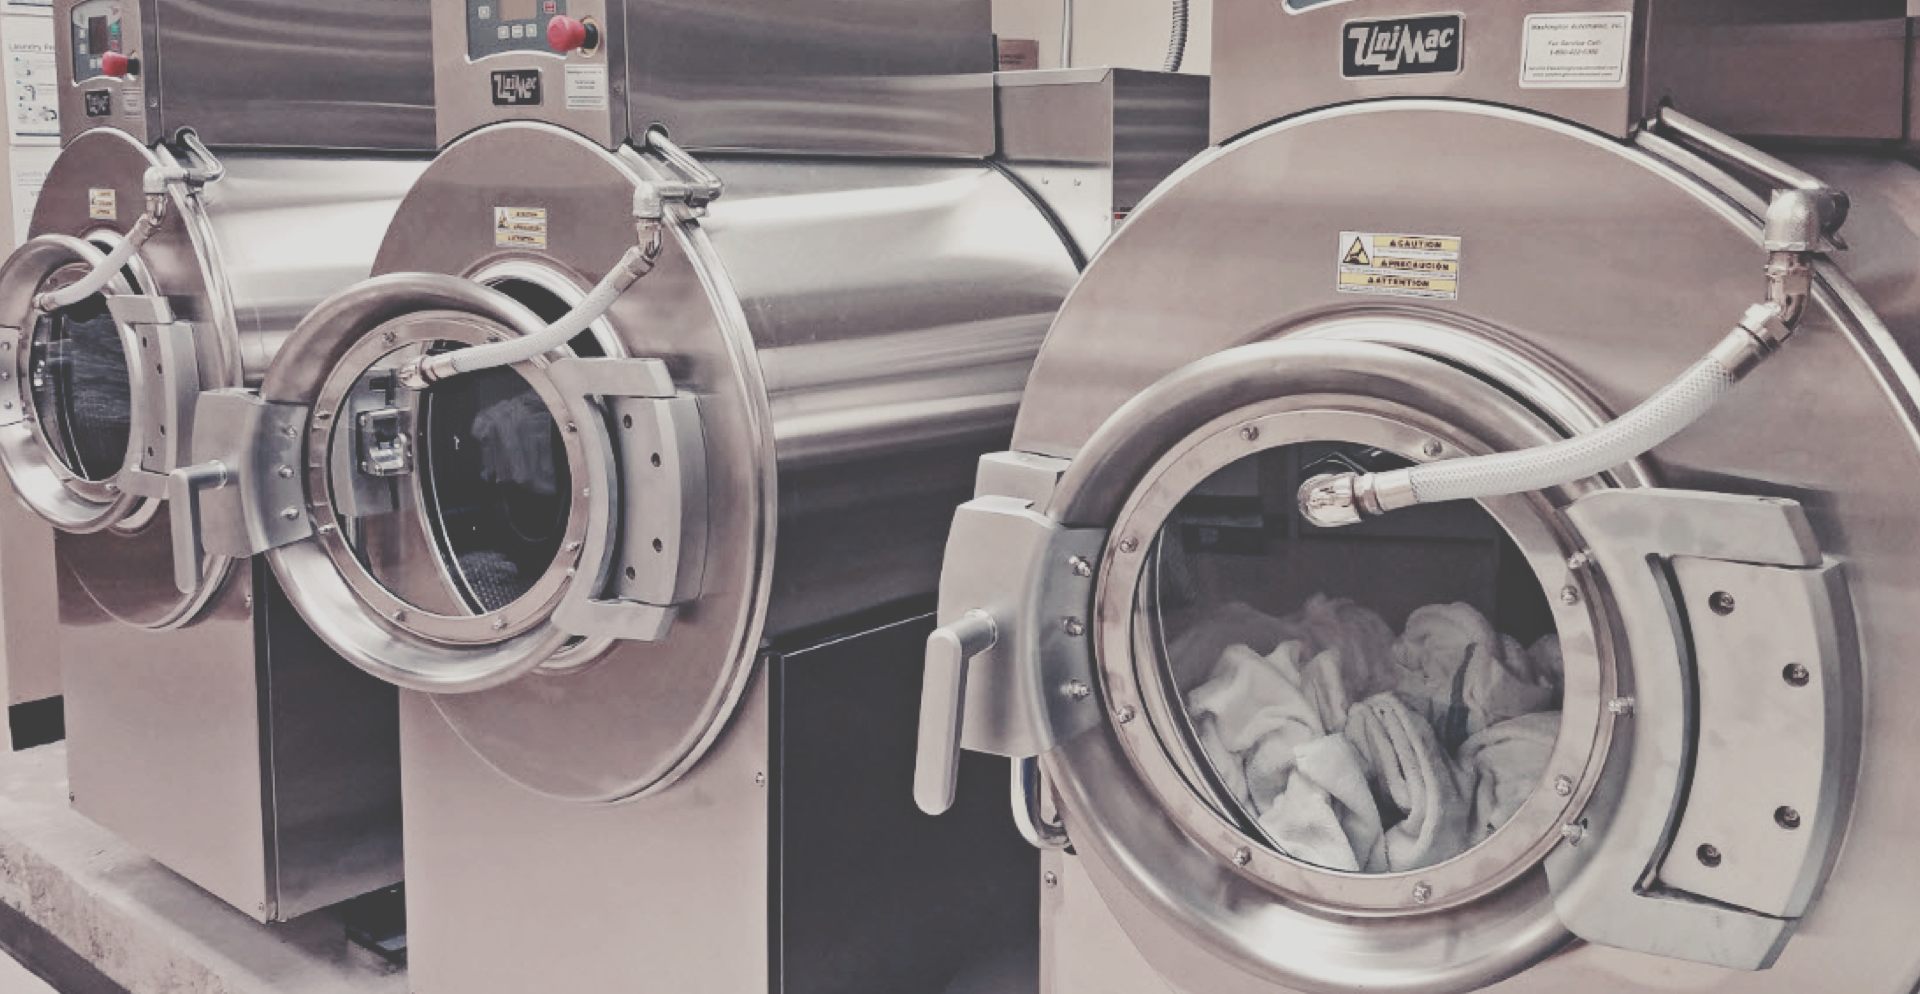 Commercial and on-premise laundry operators can rely on AristoCraft for all the cleaning chemicals they need, plus unparalleled tech support to use them effectively and efficiently.